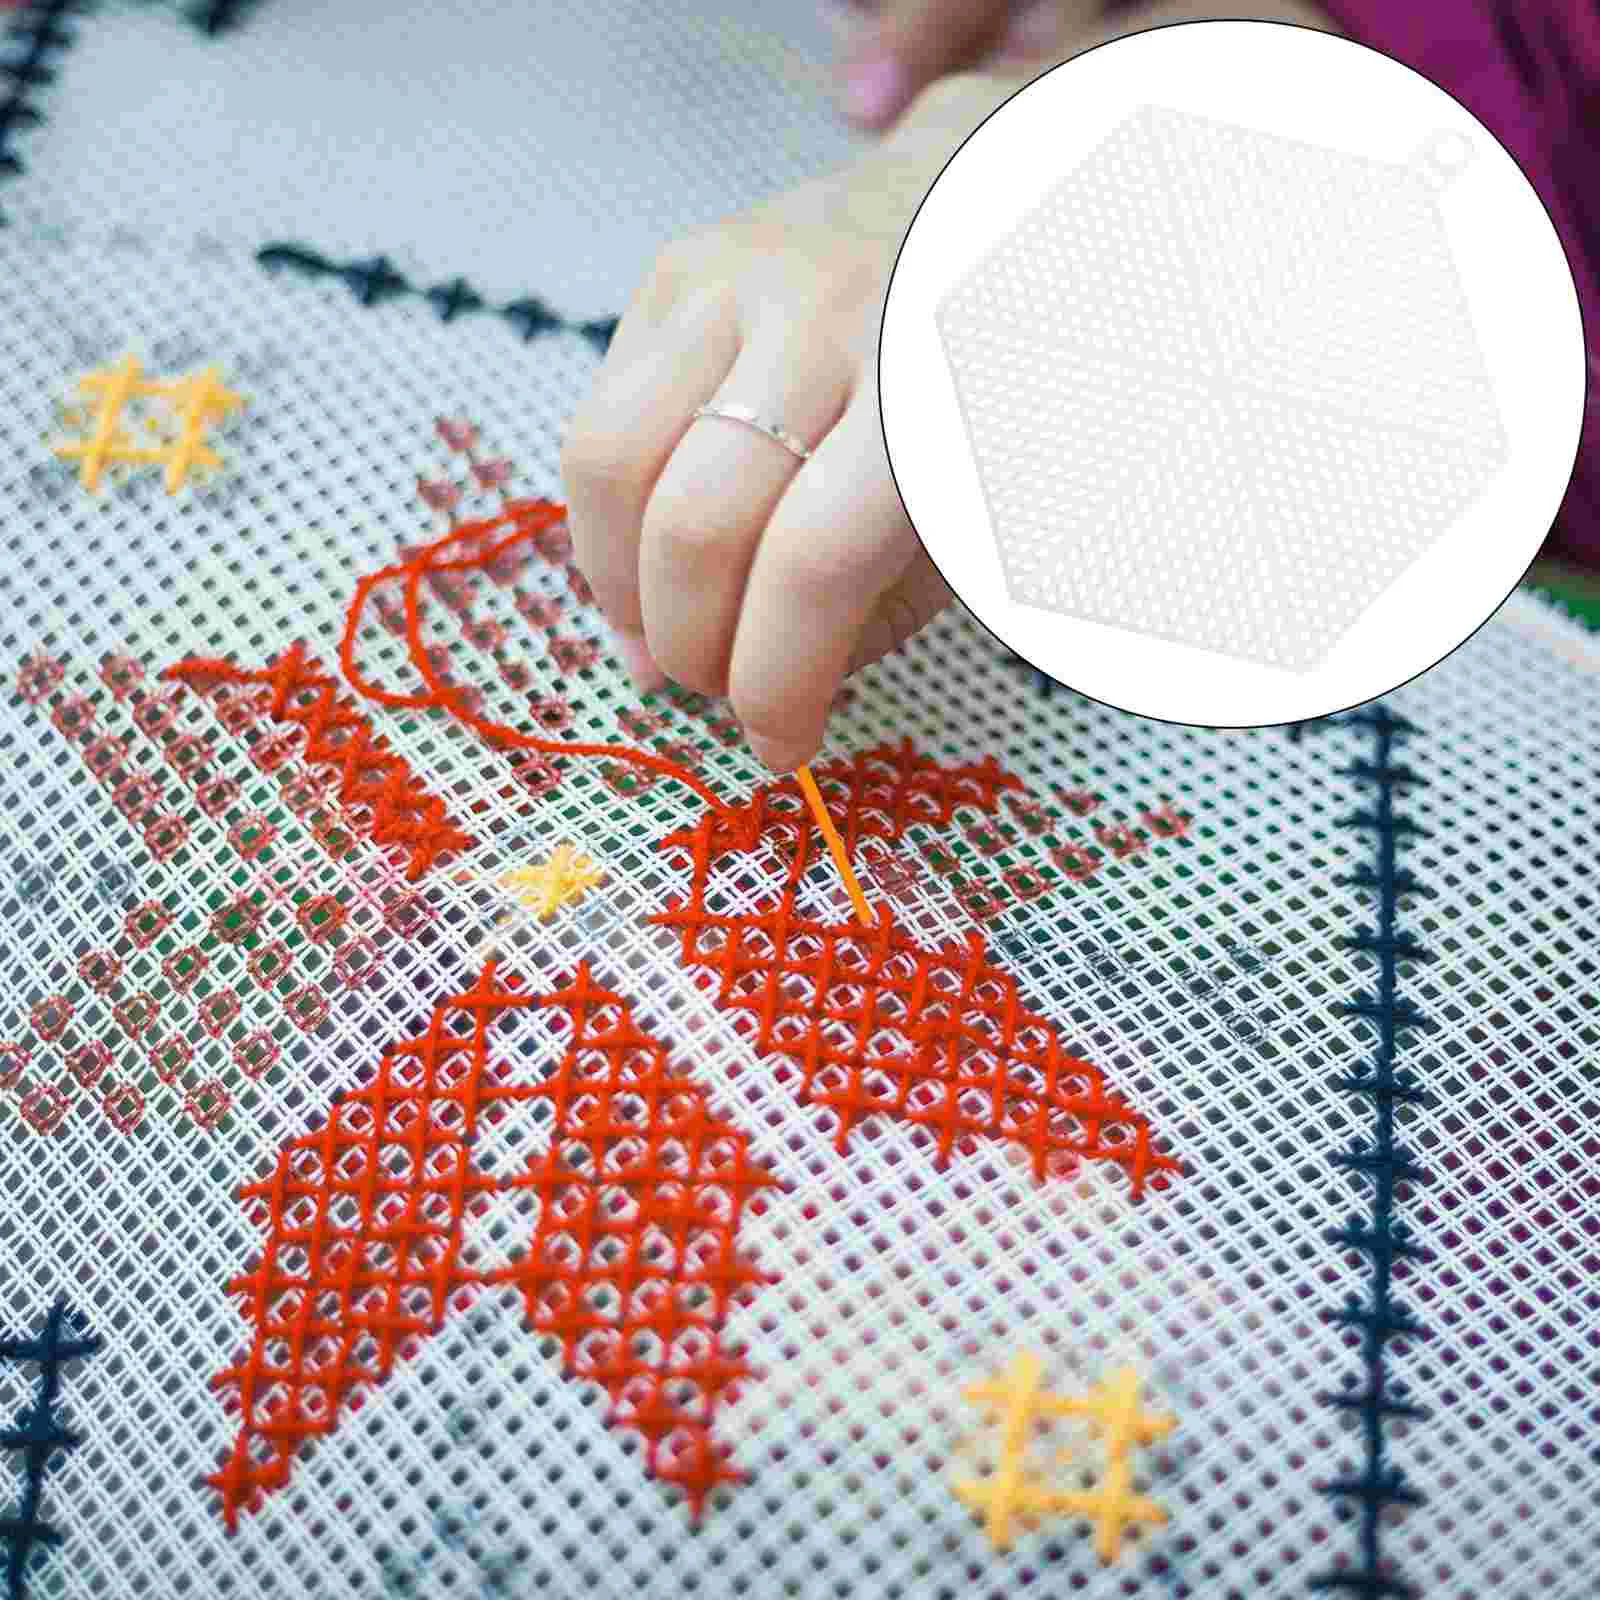 Area Rugs Mesh Plastic Canvas Diy Clear Hexagon Shape Sheets Blank Embroidery White Cross Stitch Knit Crochet